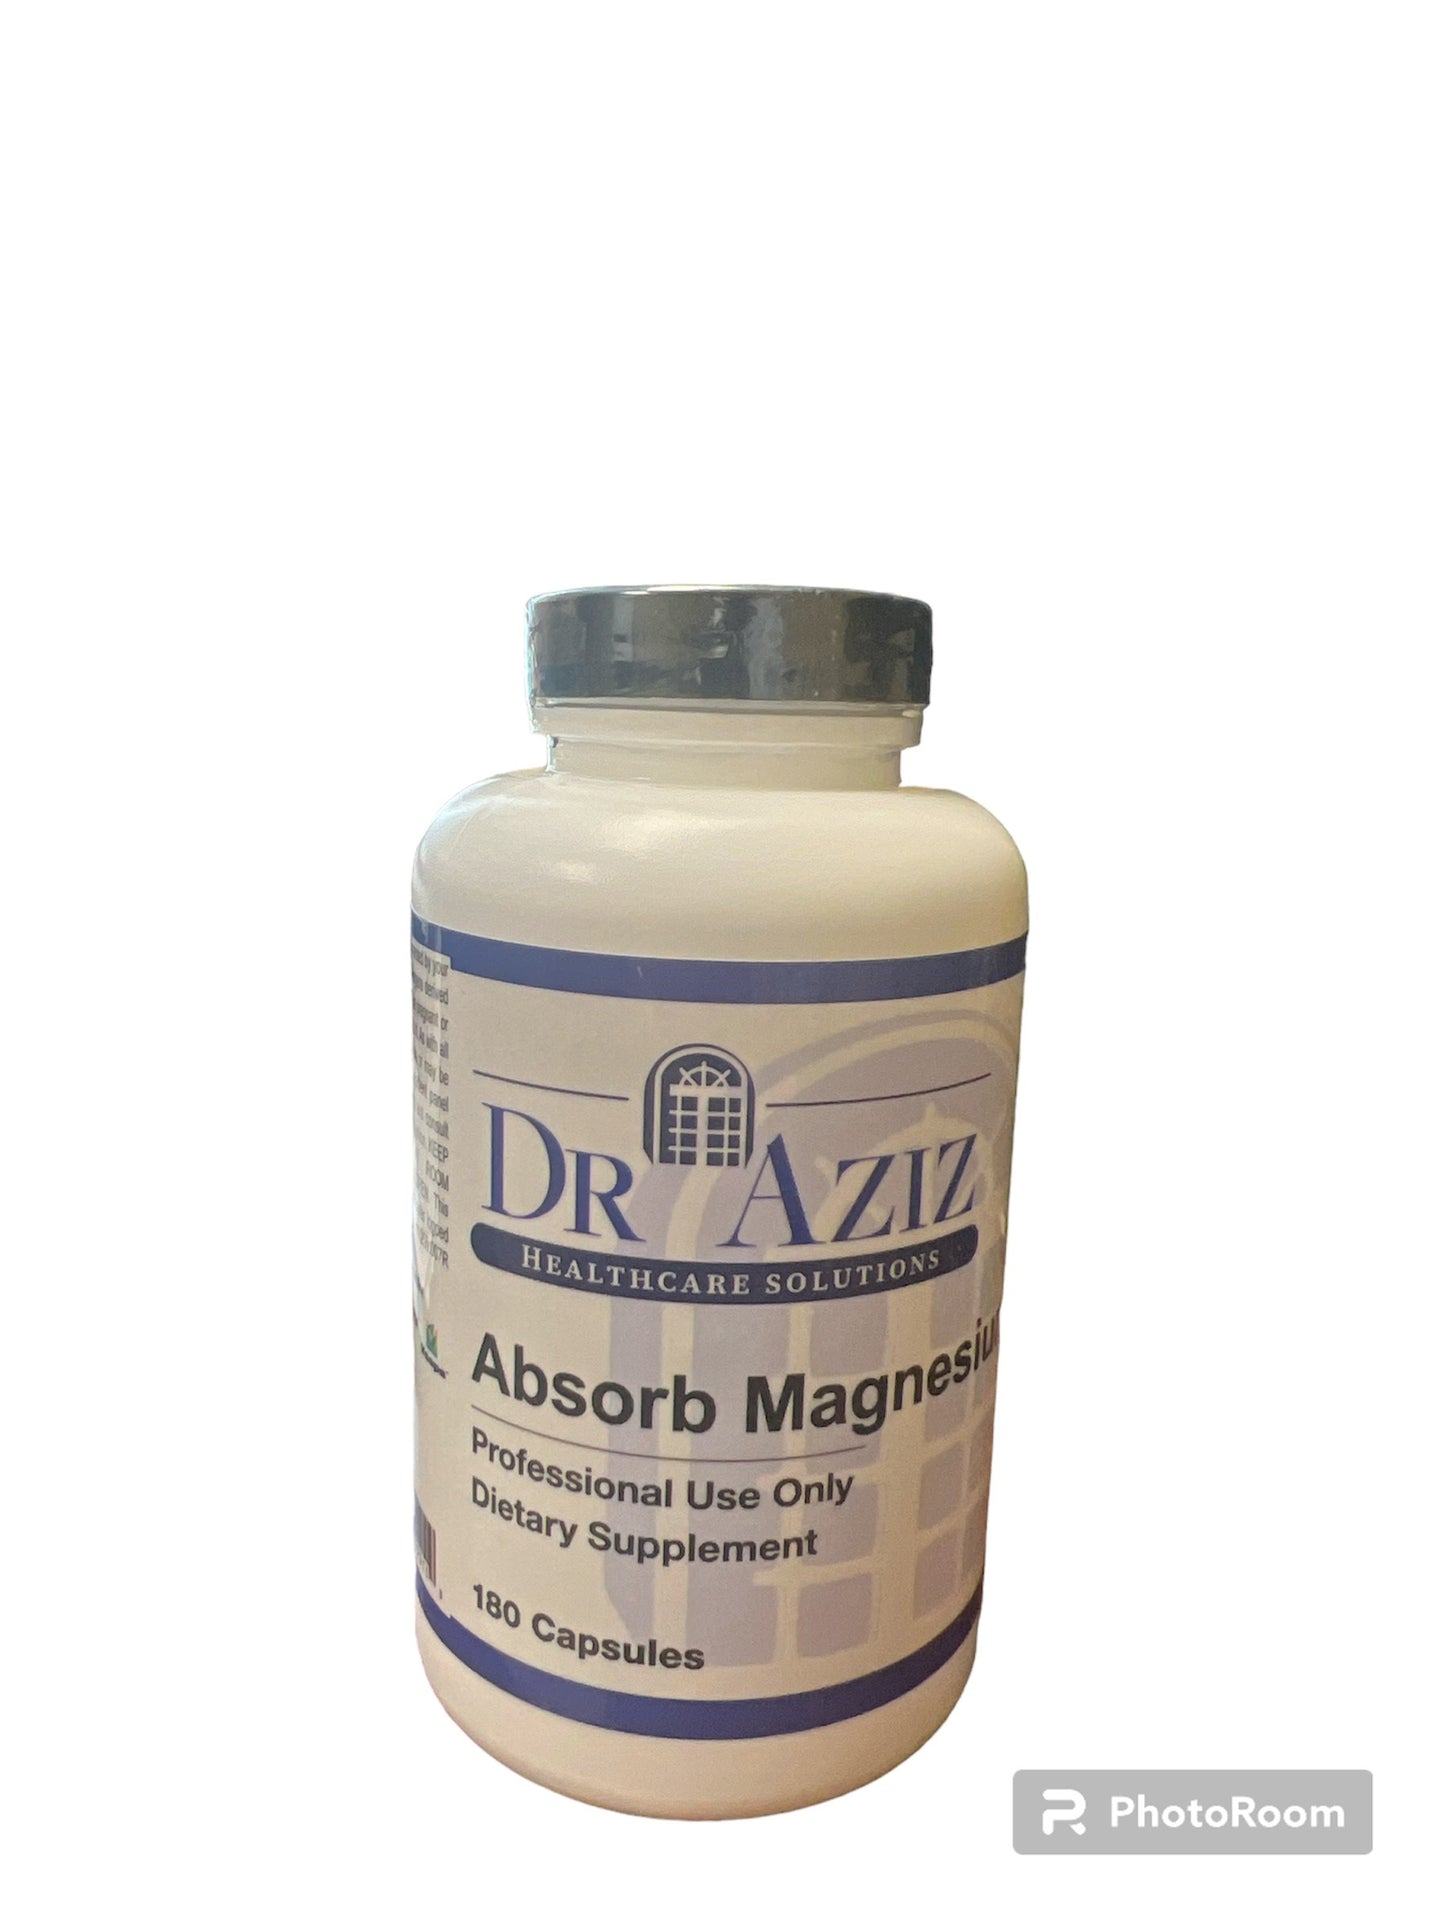 Absorb Magnesium| Magnesium Support Supplement |Dr Aziz Pharmacy